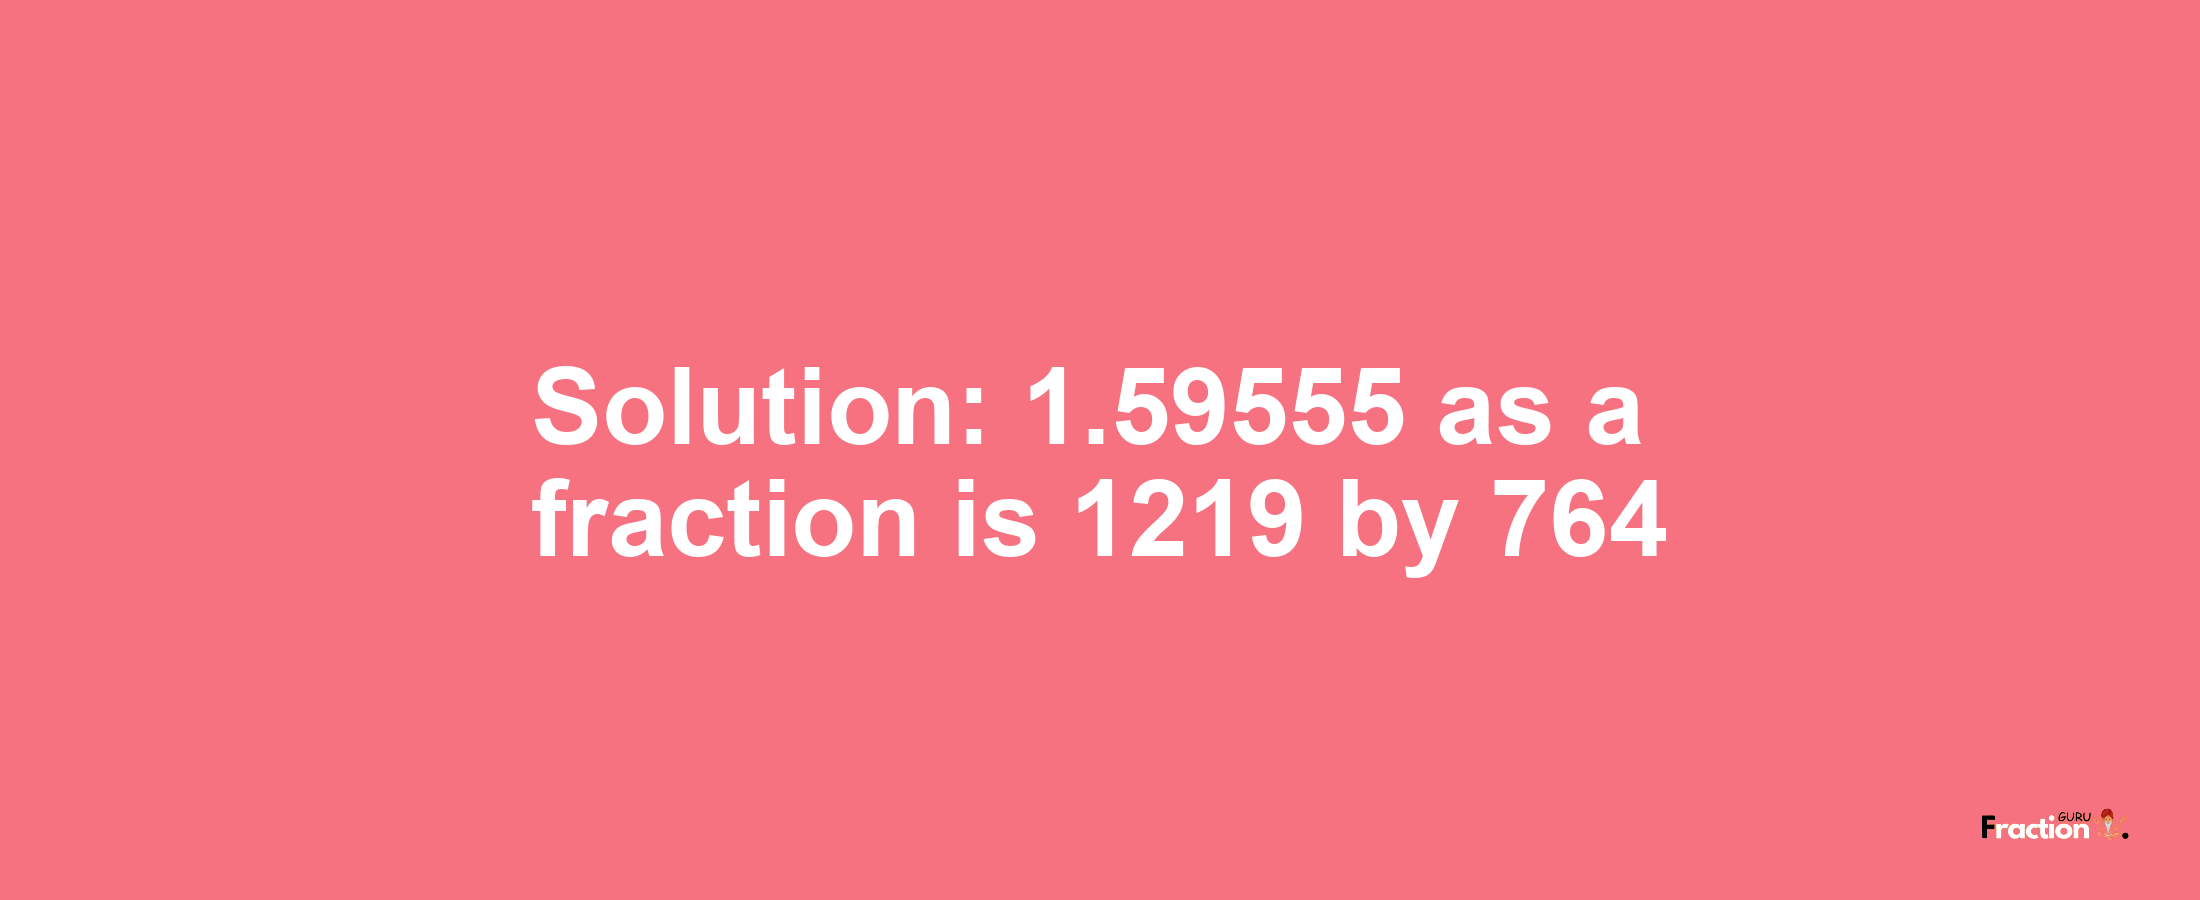 Solution:1.59555 as a fraction is 1219/764